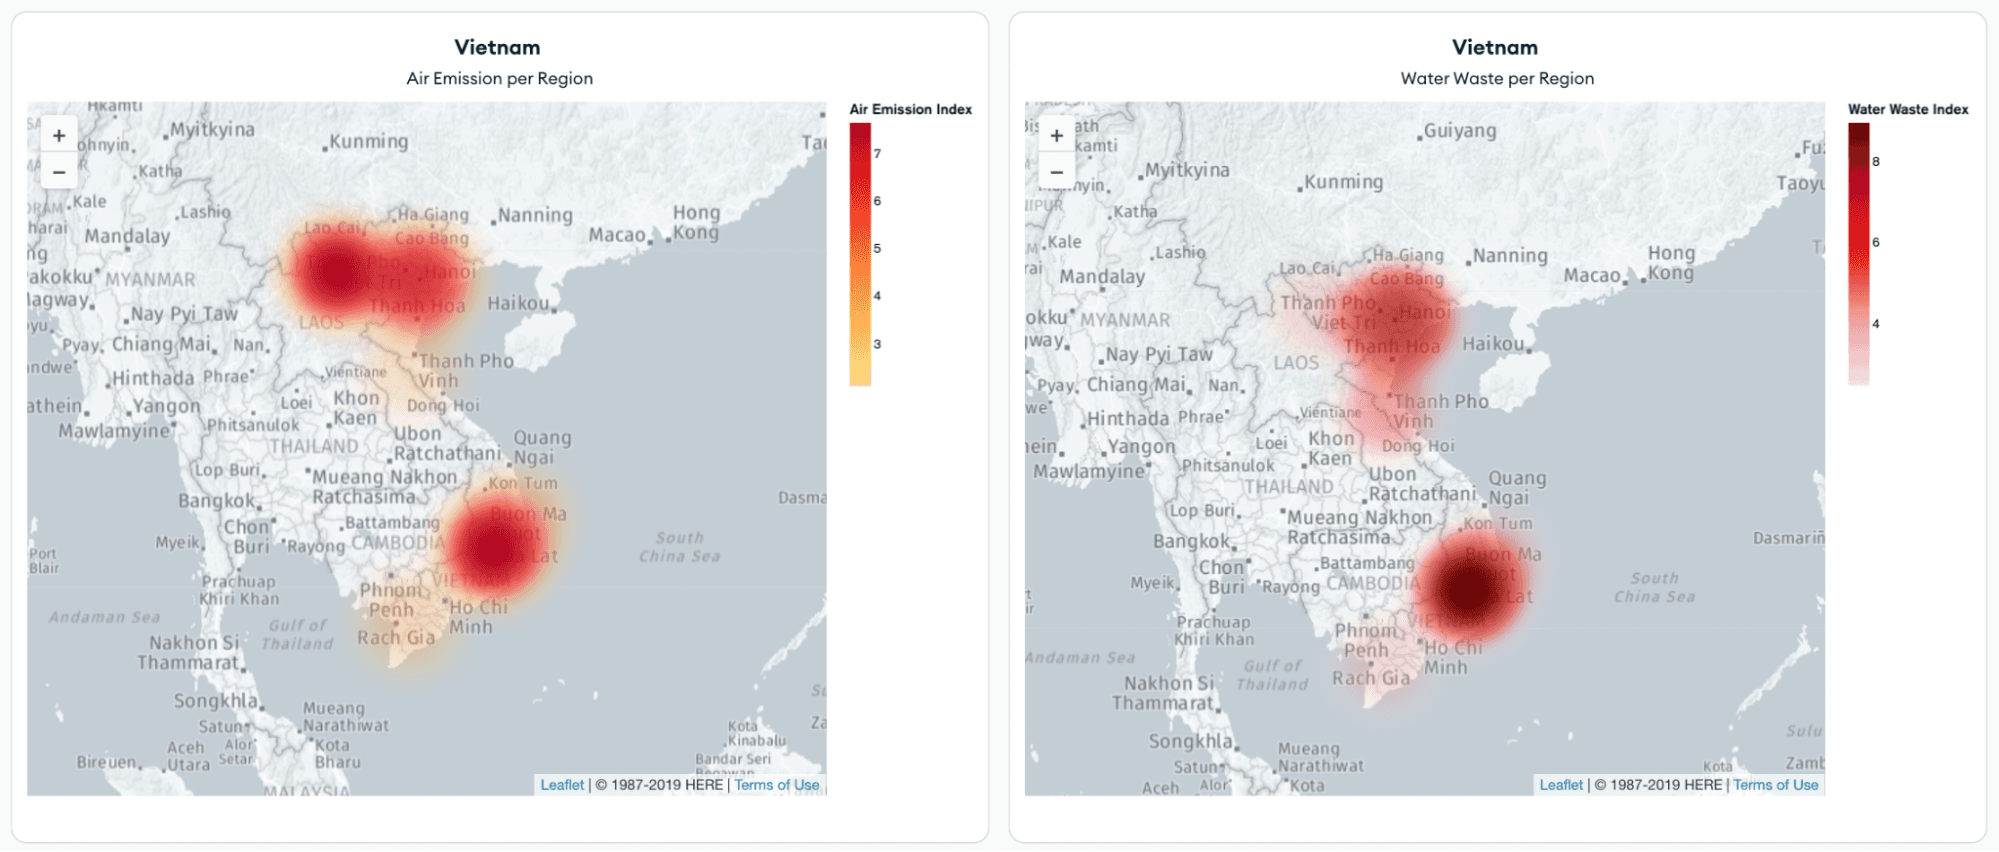 Heatmaps of Environment, Air Emission, Water Waste Indexes in Vietnam in MongoDB Atlas Charts